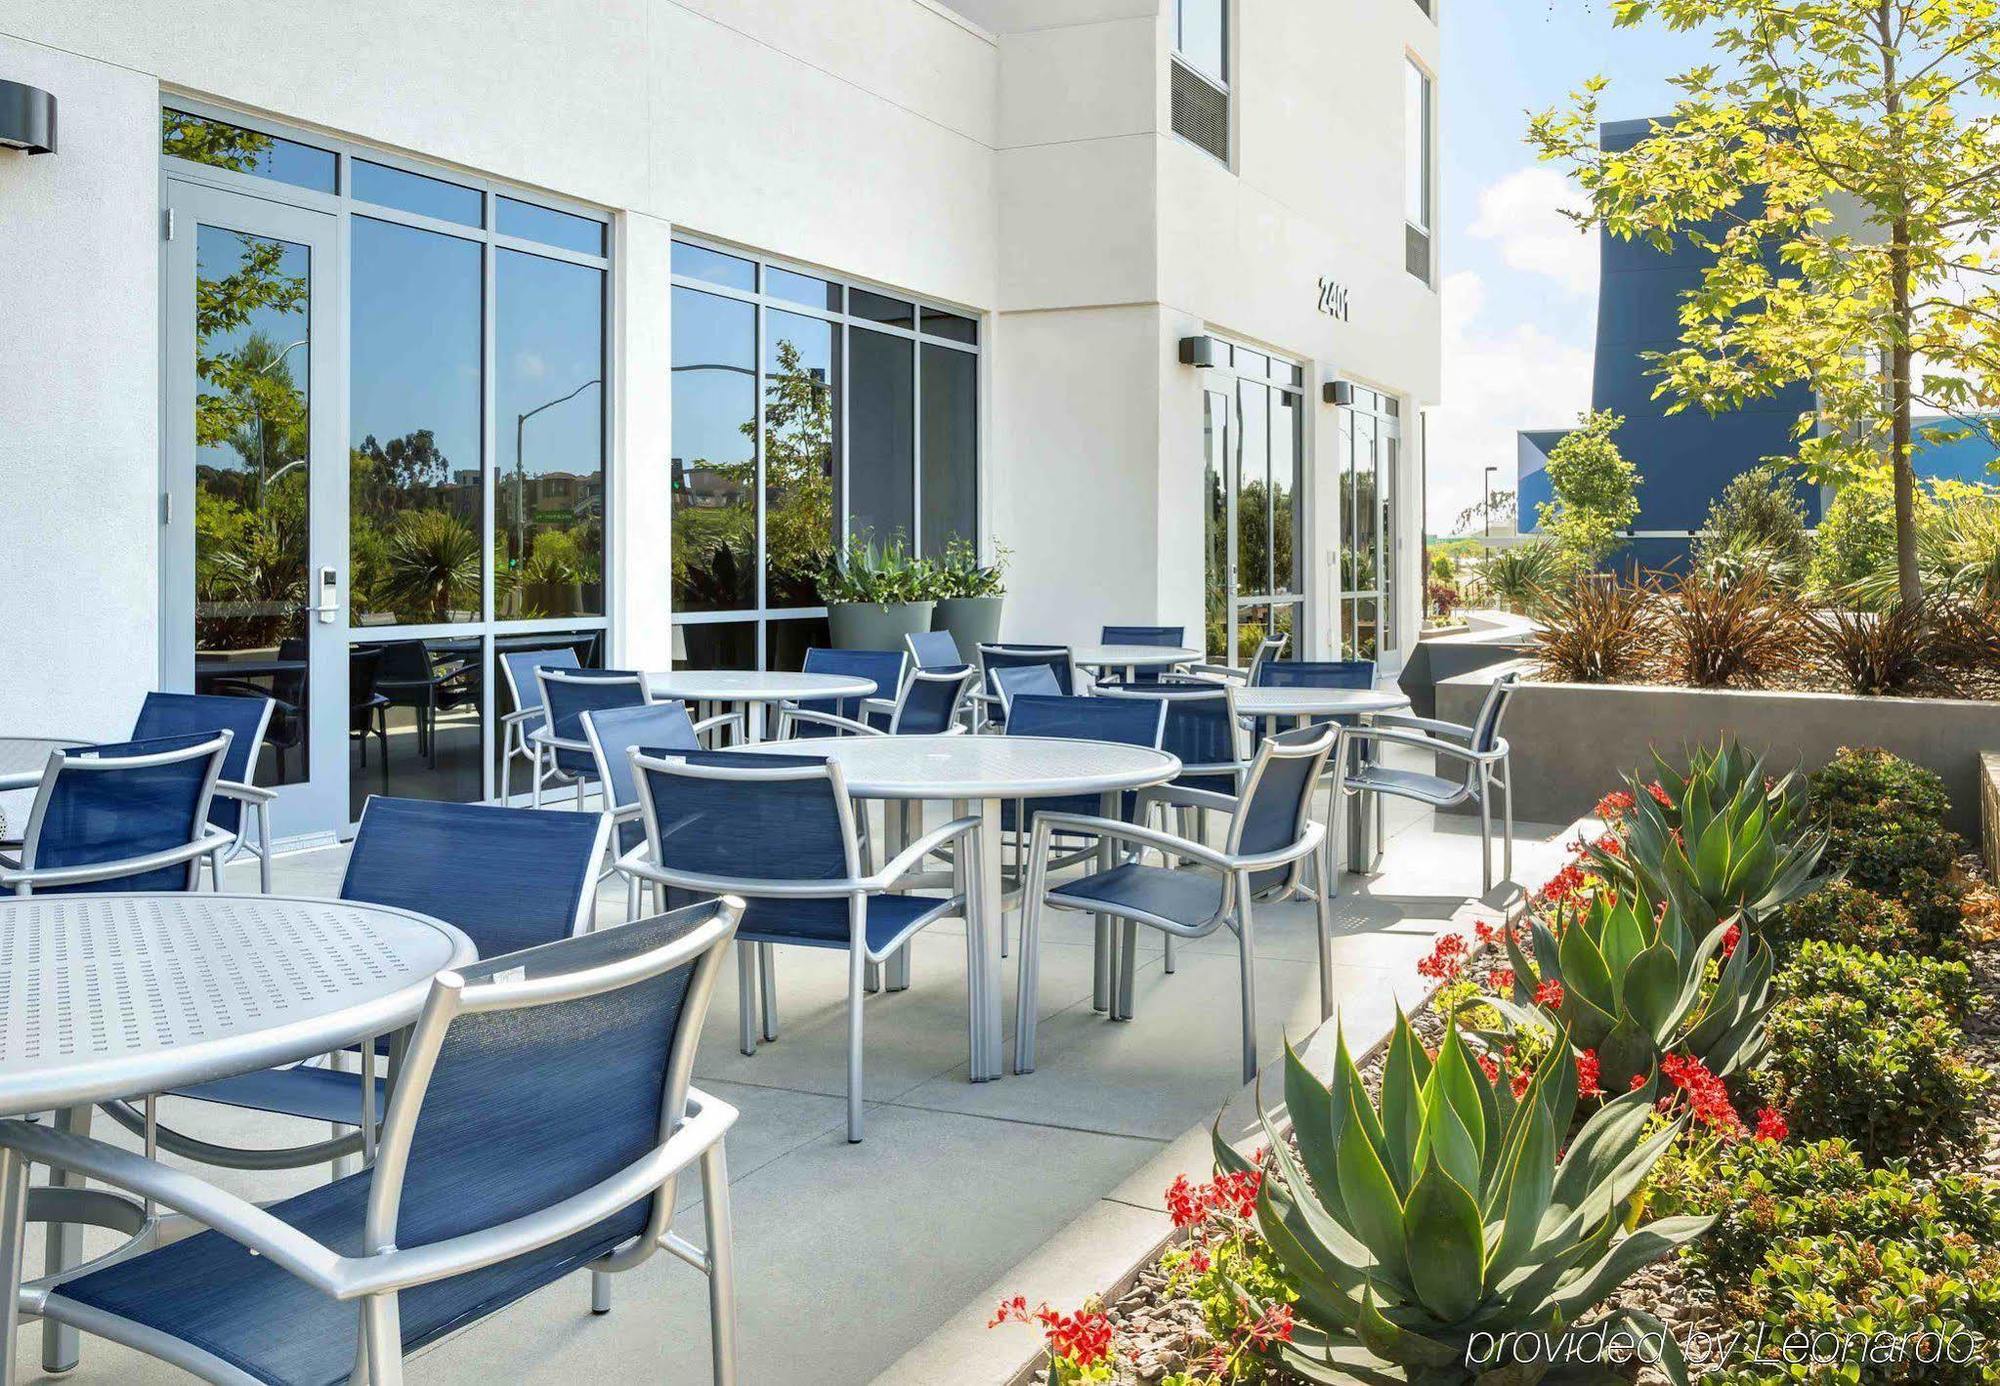 Springhill Suites By Marriott San Diego Mission Valley Luaran gambar